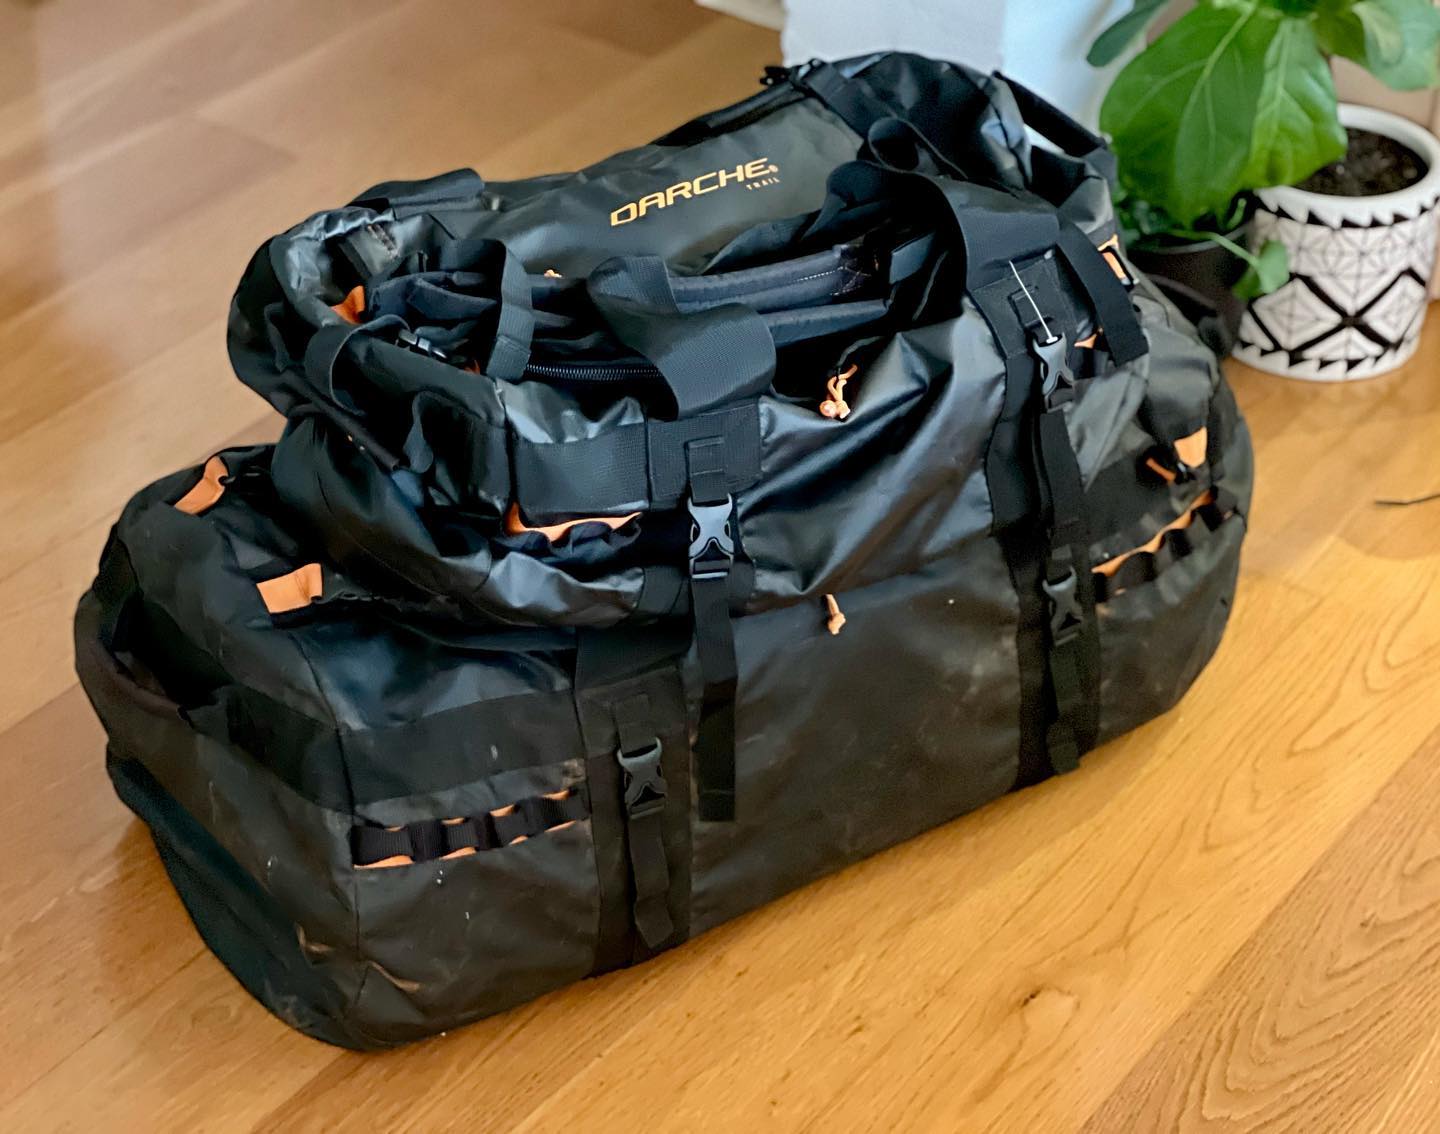 You used to have to buy ridiculously overpriced alpine gear for expedition bags, but I’m running all @darcheoutdoorgear bags now. They’ve been from coast to coast, on boats, in the dirt, planes, trains and they’re legendary.
A good bag is hard to find…a great bag is impossible to destroy.